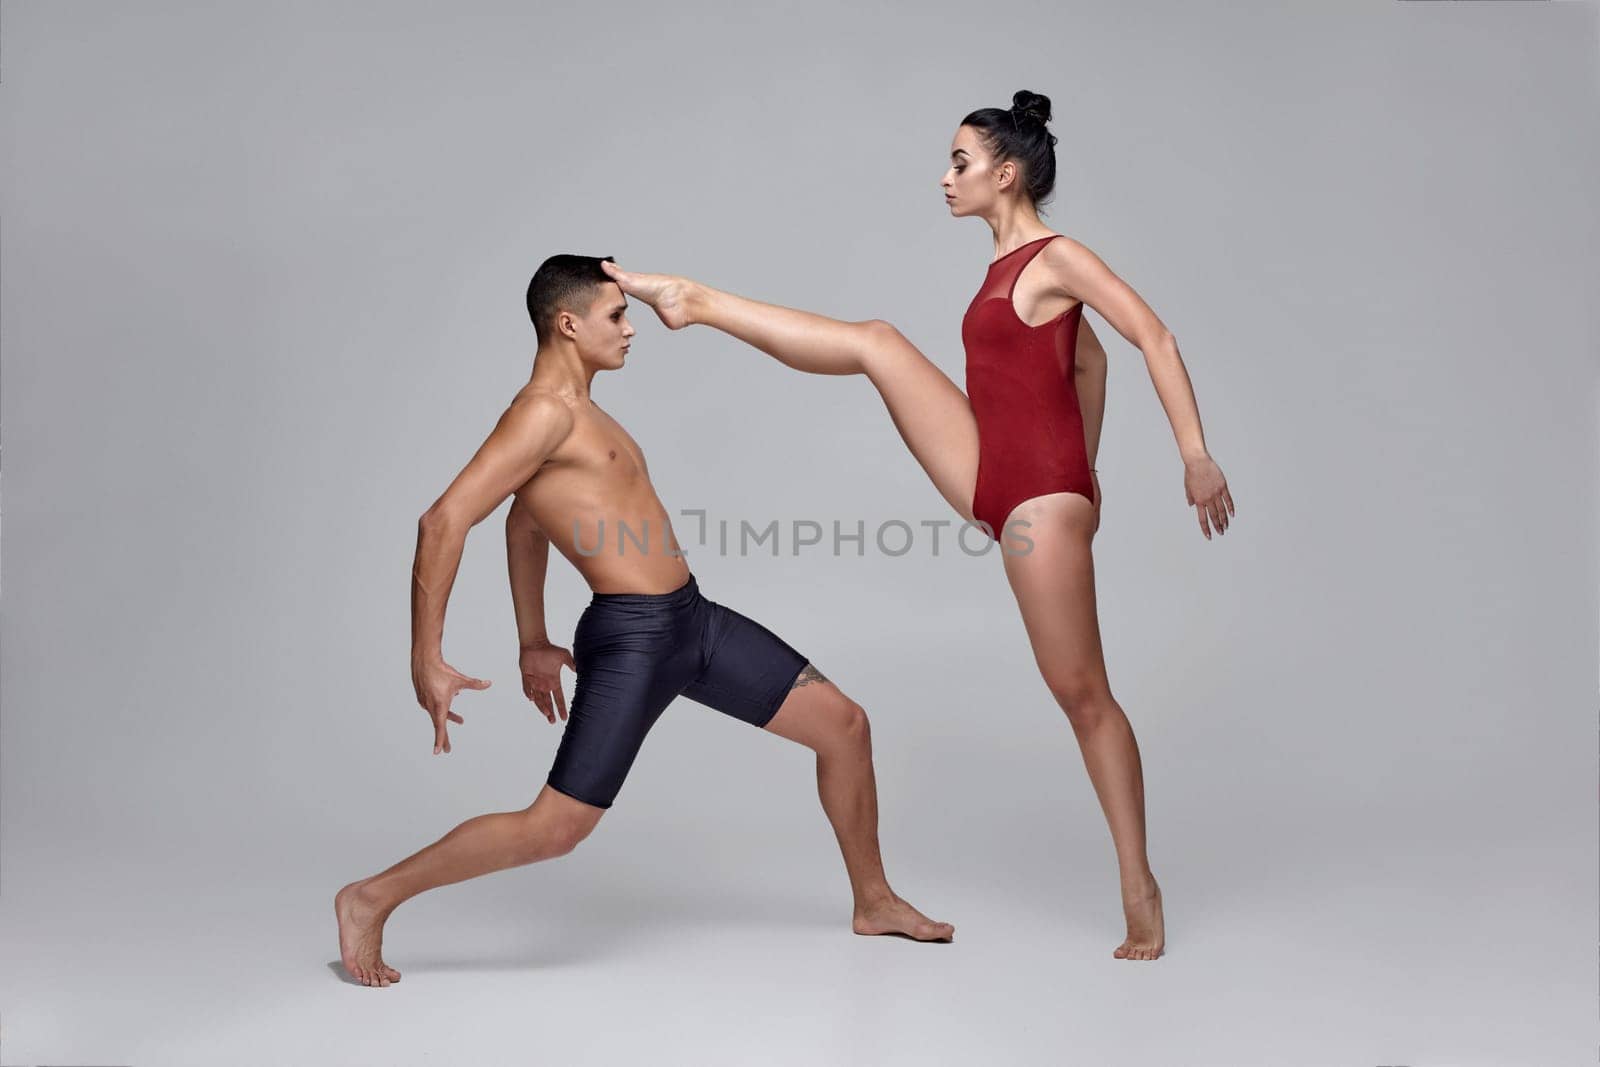 Two young modern ballet dancers are posing against a gray studio background. Good-looking man in black shorts and charming woman in a red swimwear are dancing together. Ballet and contemporary choreography concept. Art photo.